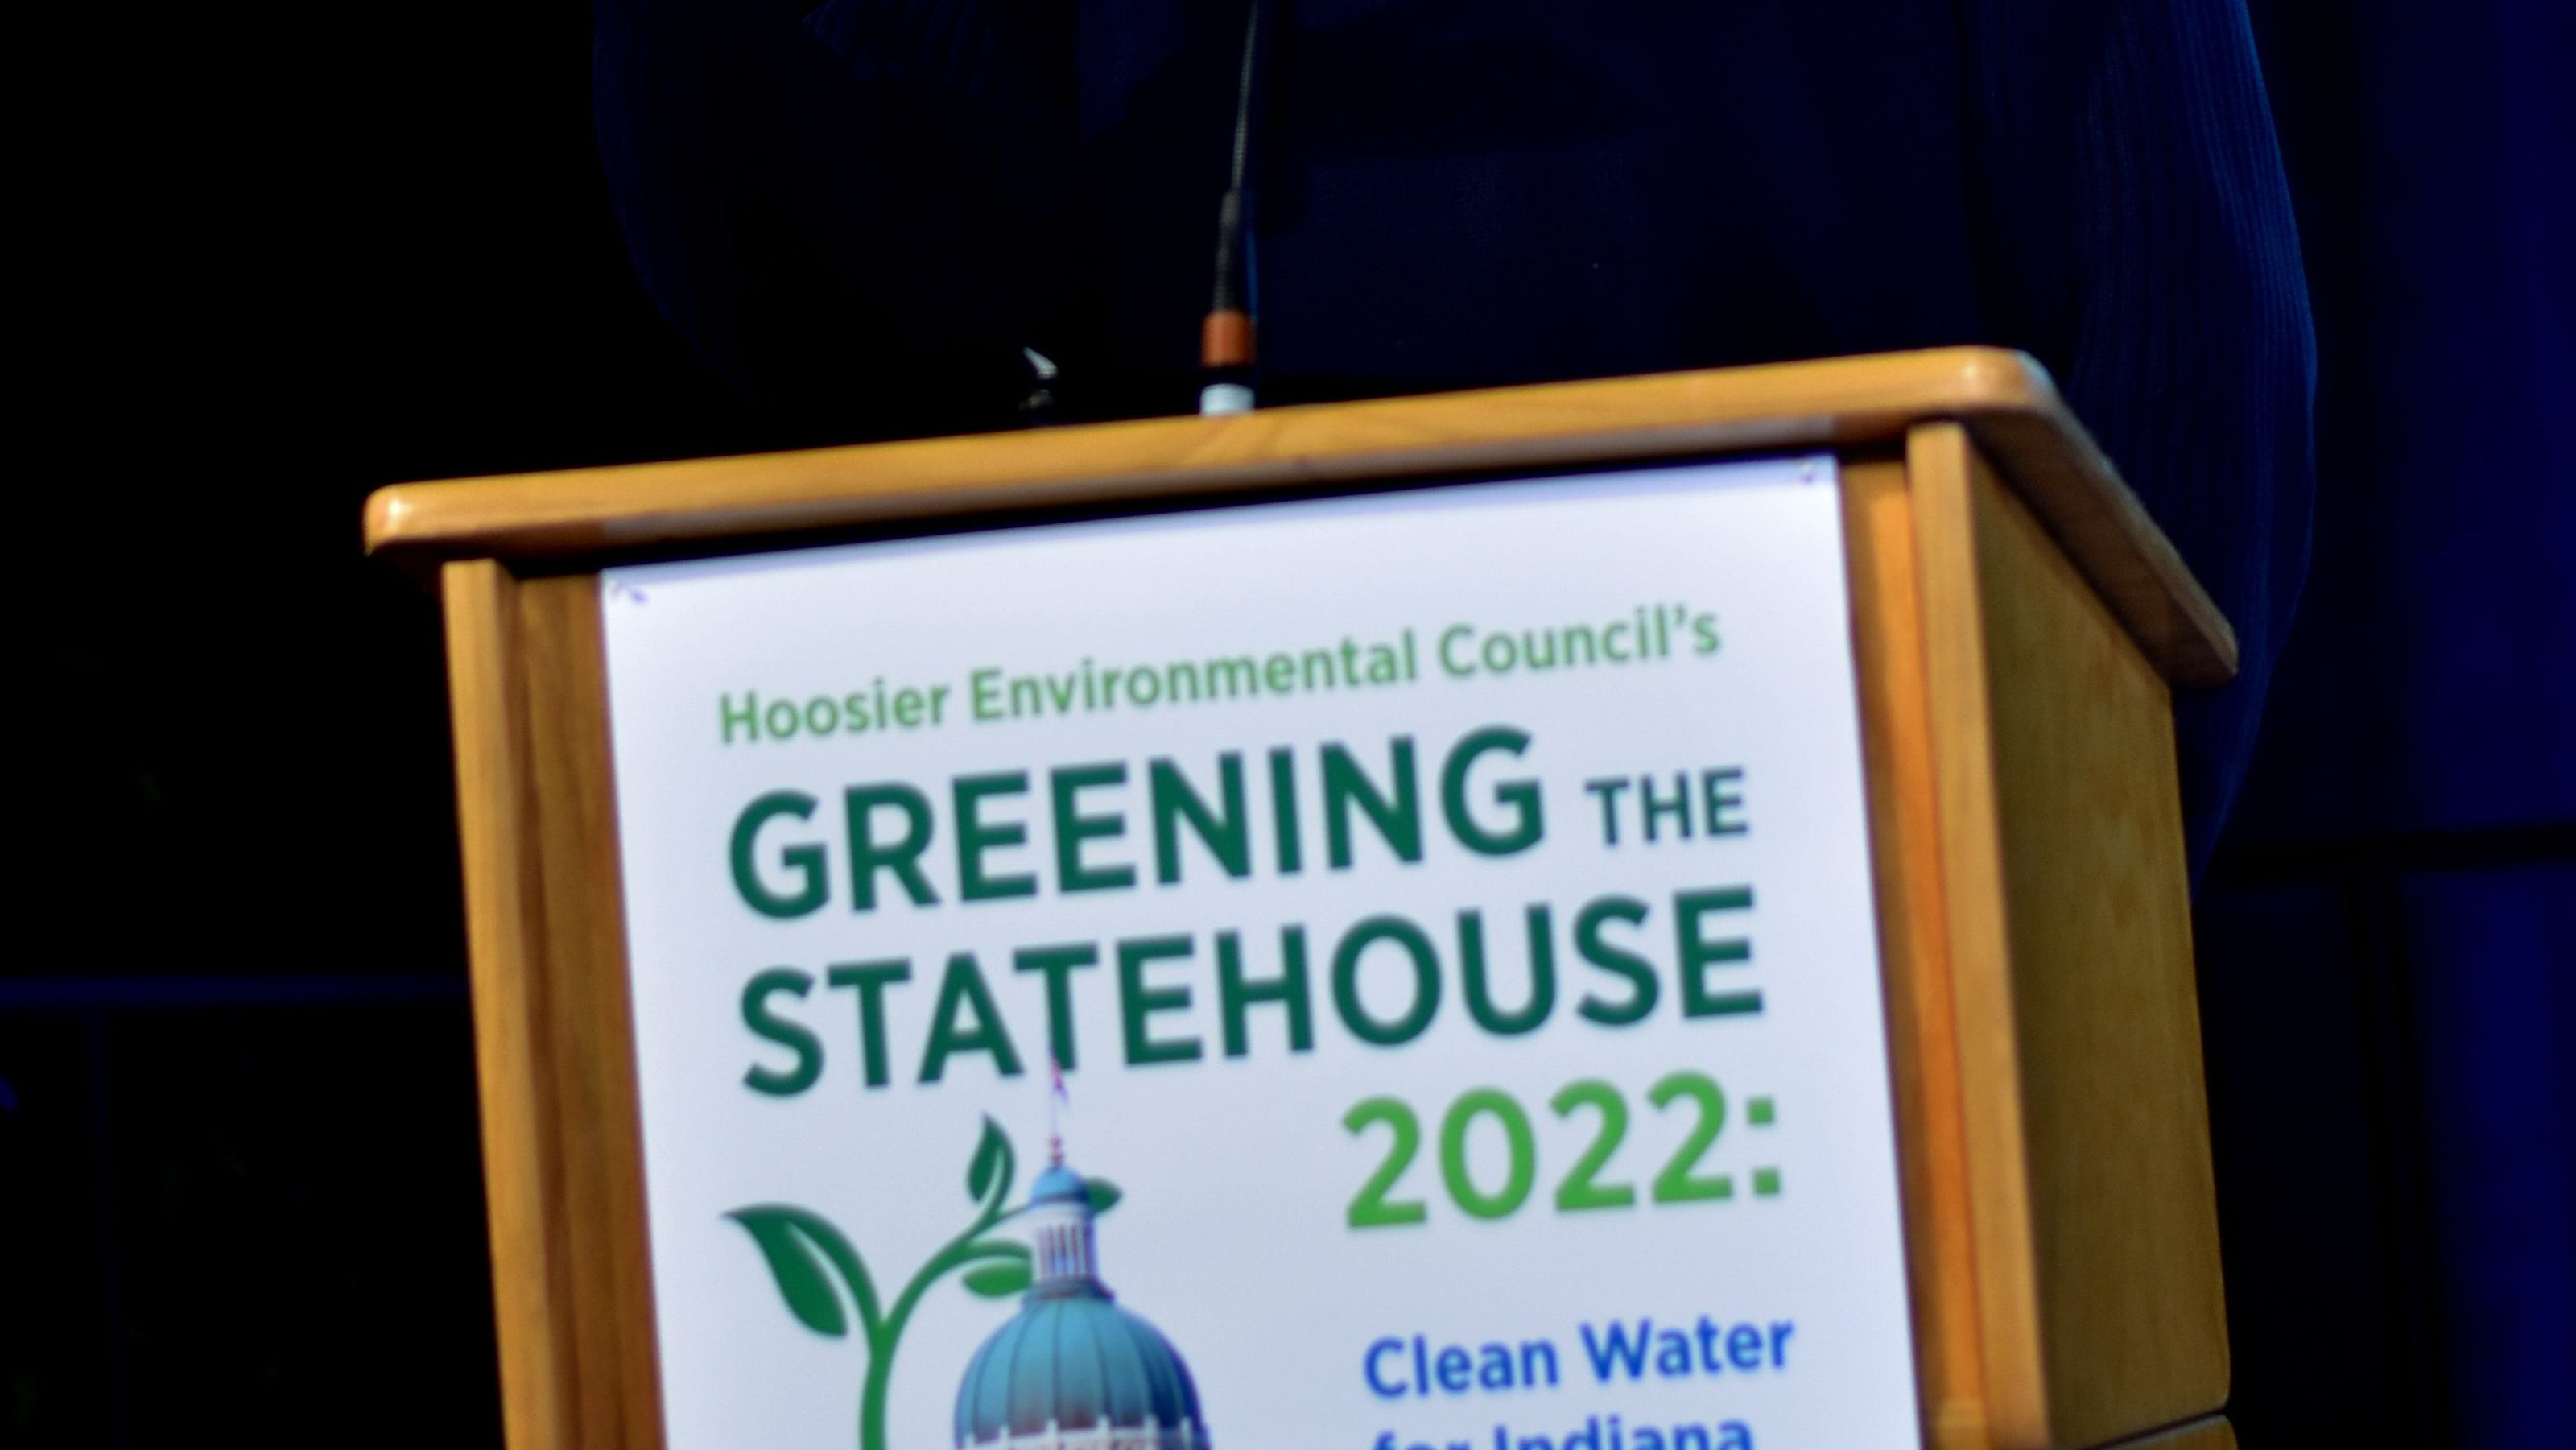 New leader takes the helm at Hoosier Environmental Council